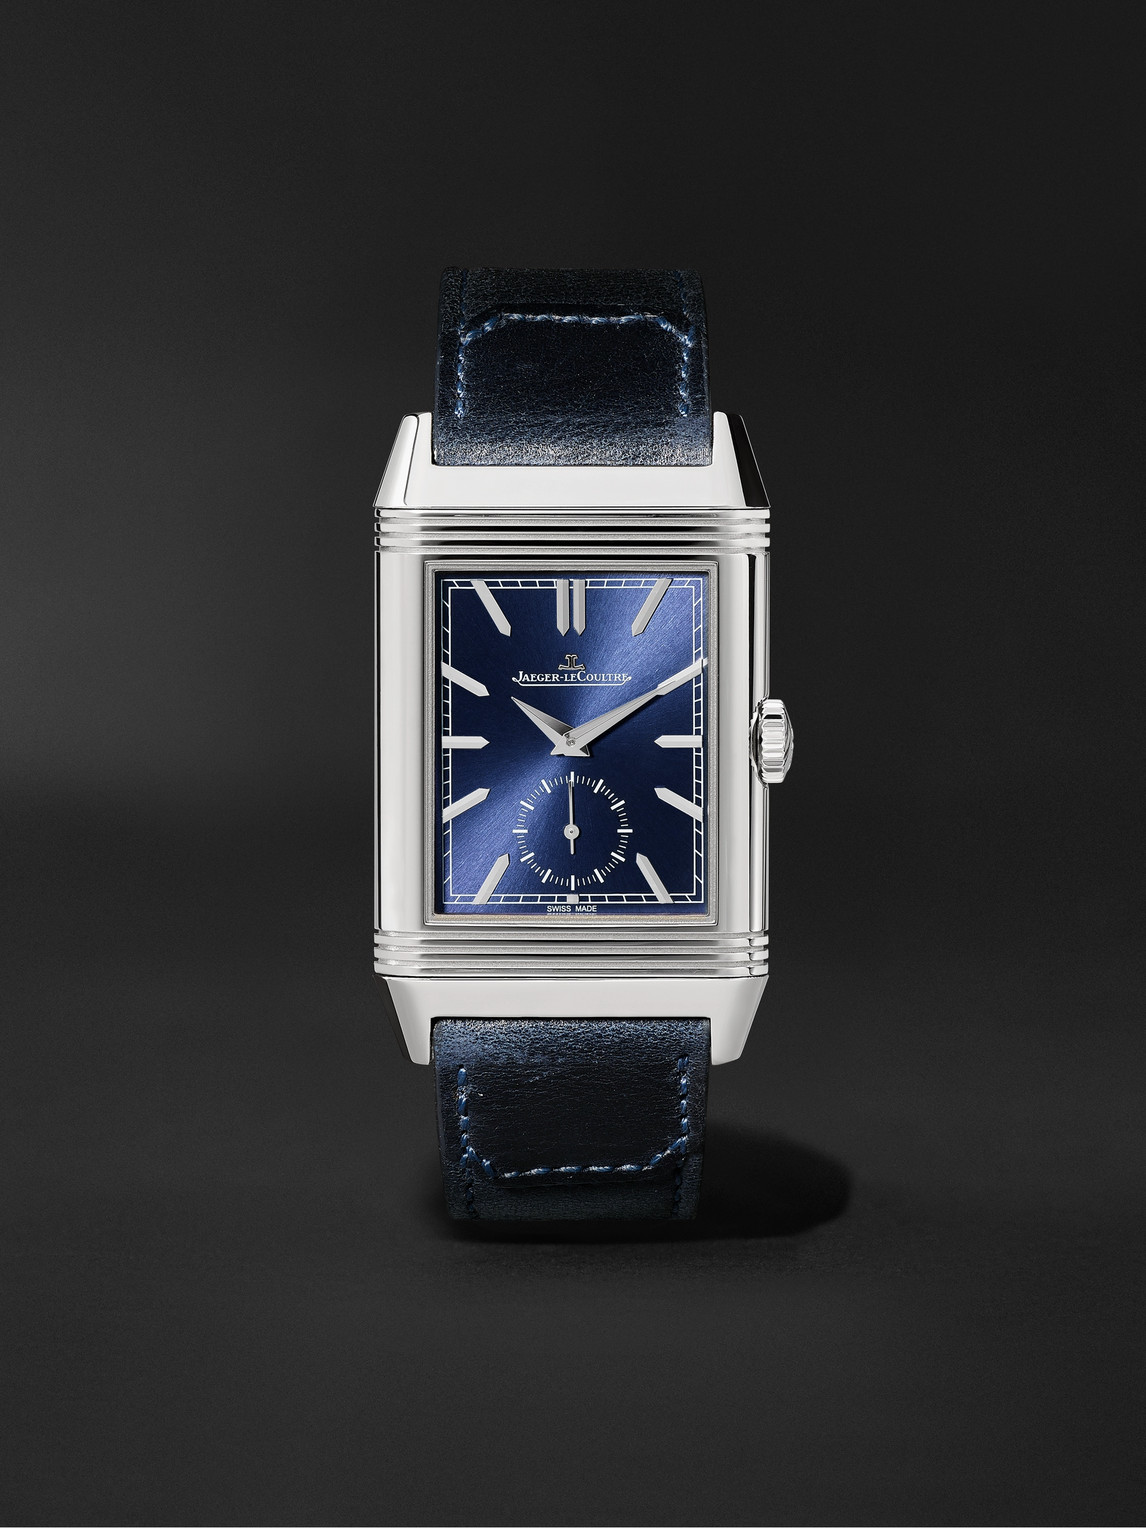 Reverso Tribute Duoface Hand-Wound 47mm x 28.3mm Stainless Steel and Leather Watch, Ref. No. 3988482